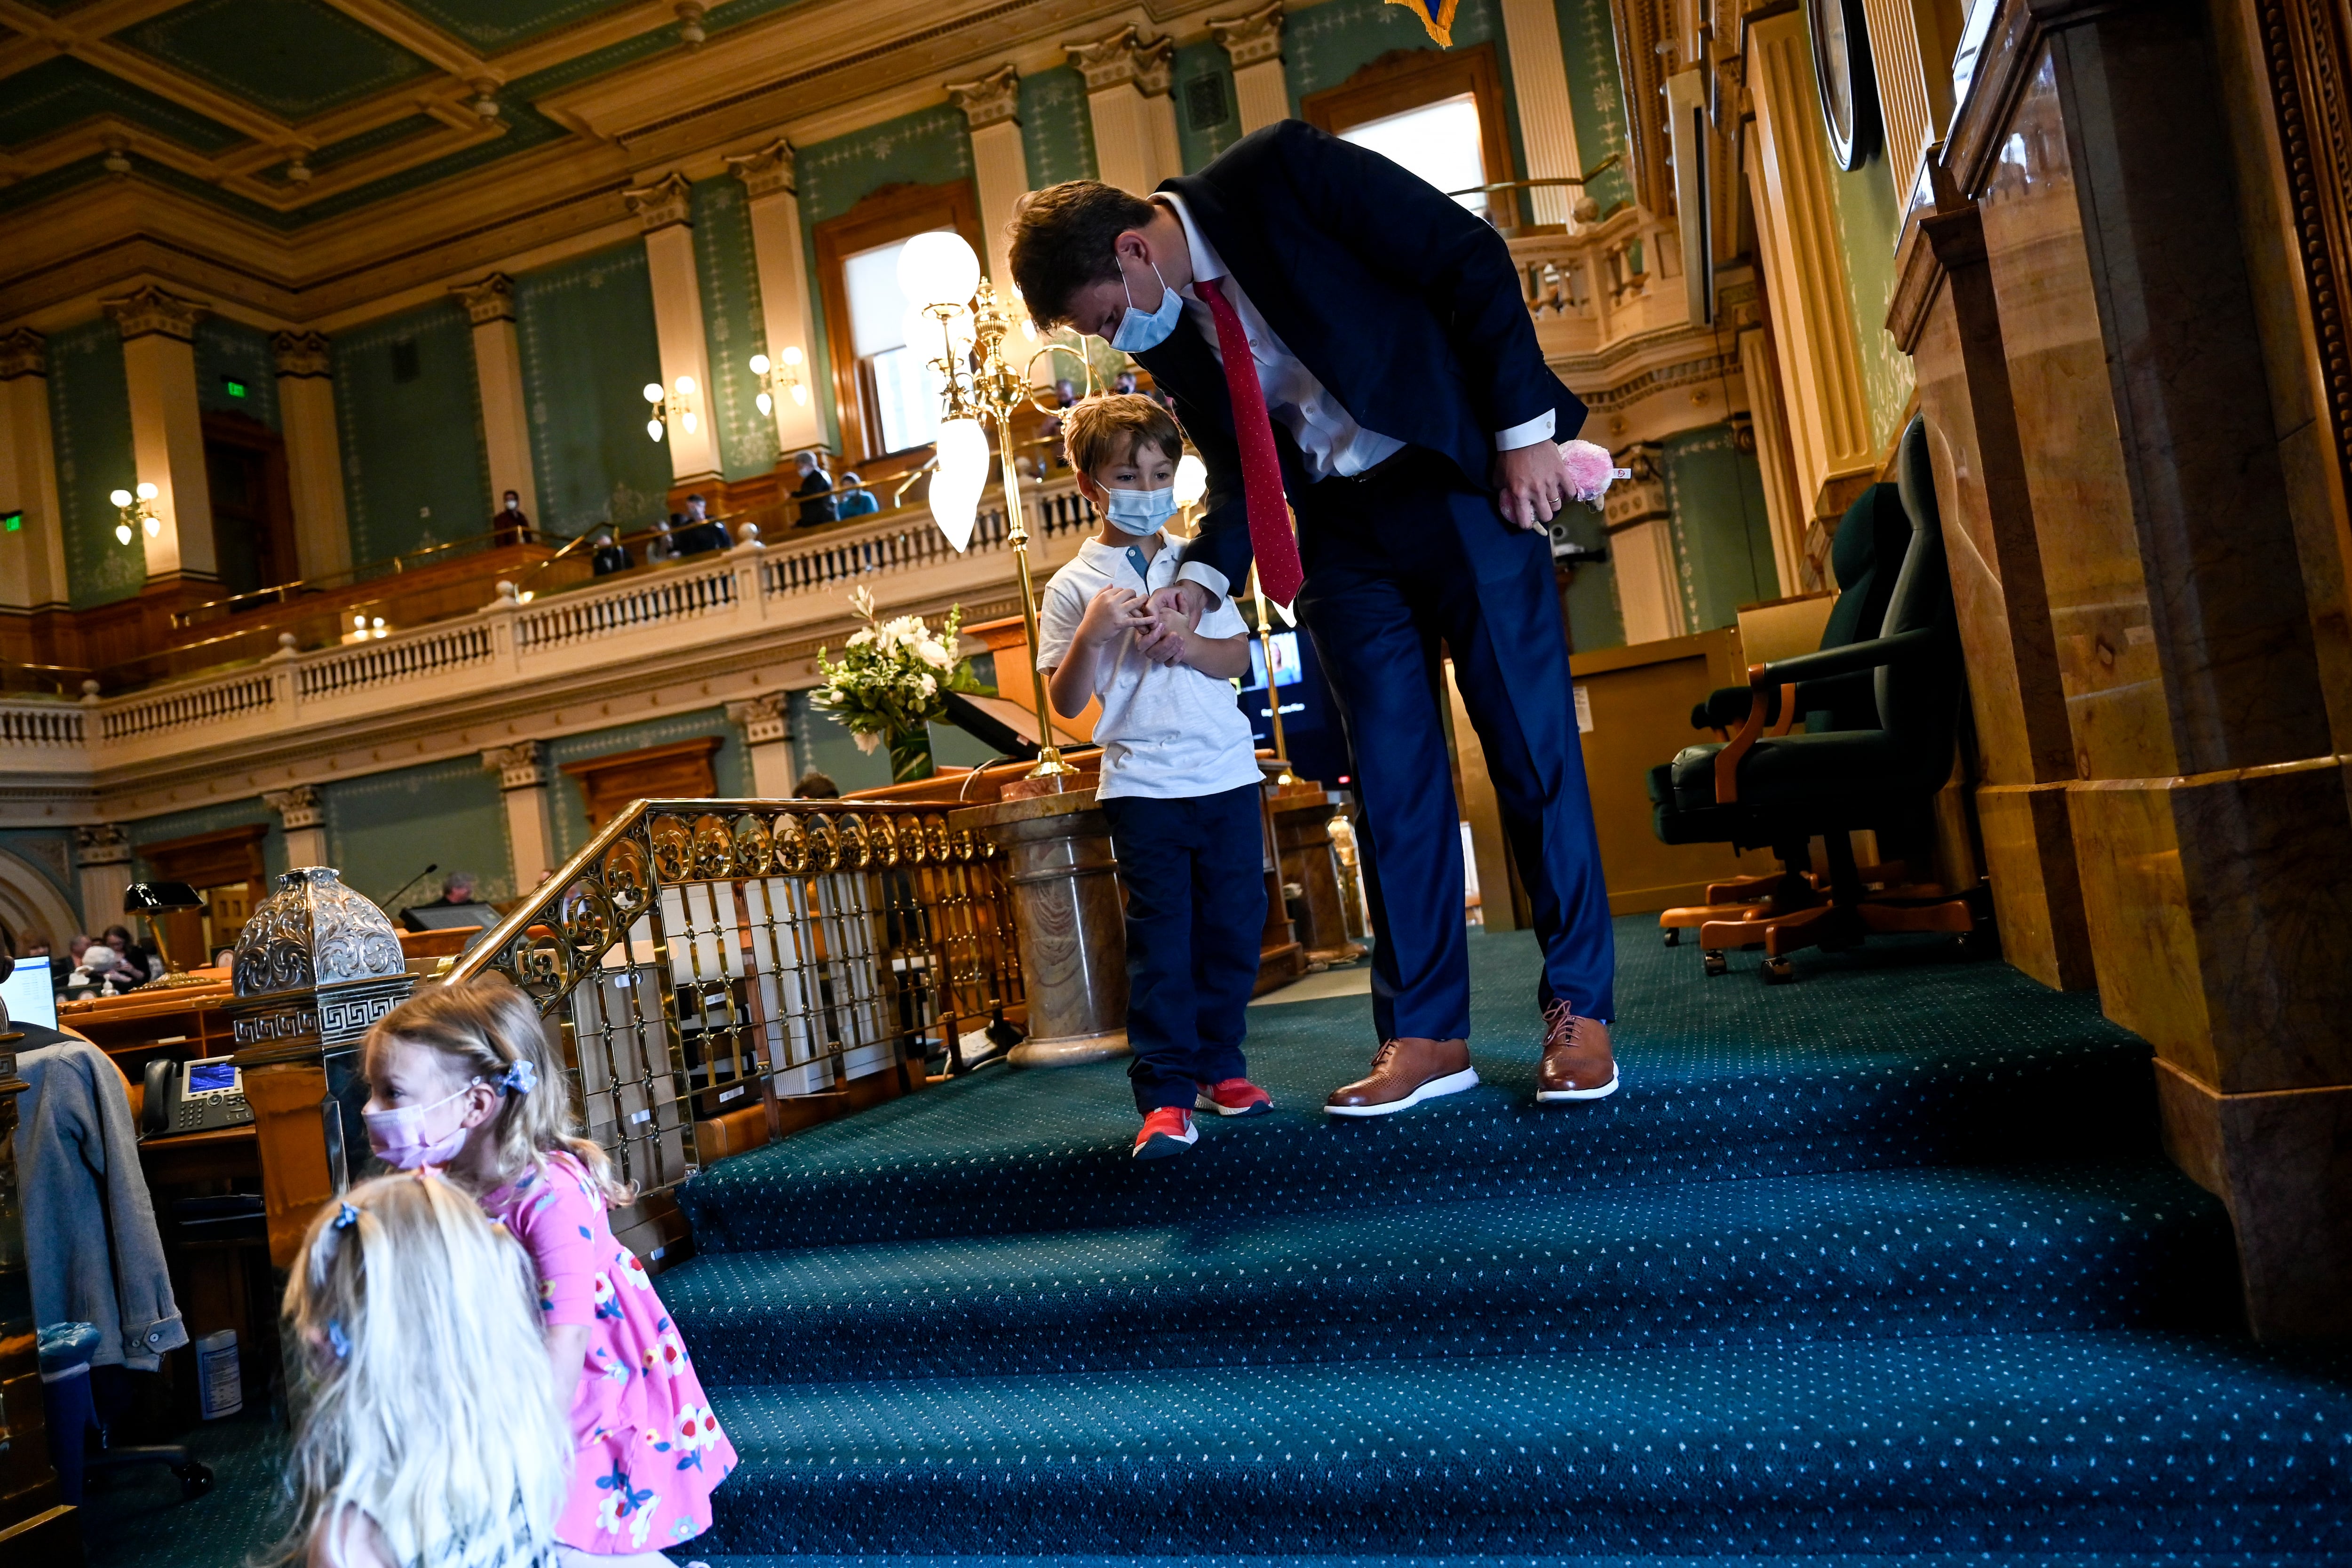 A man leans down to talk to his young son on the floor of the Colorado Statehouse